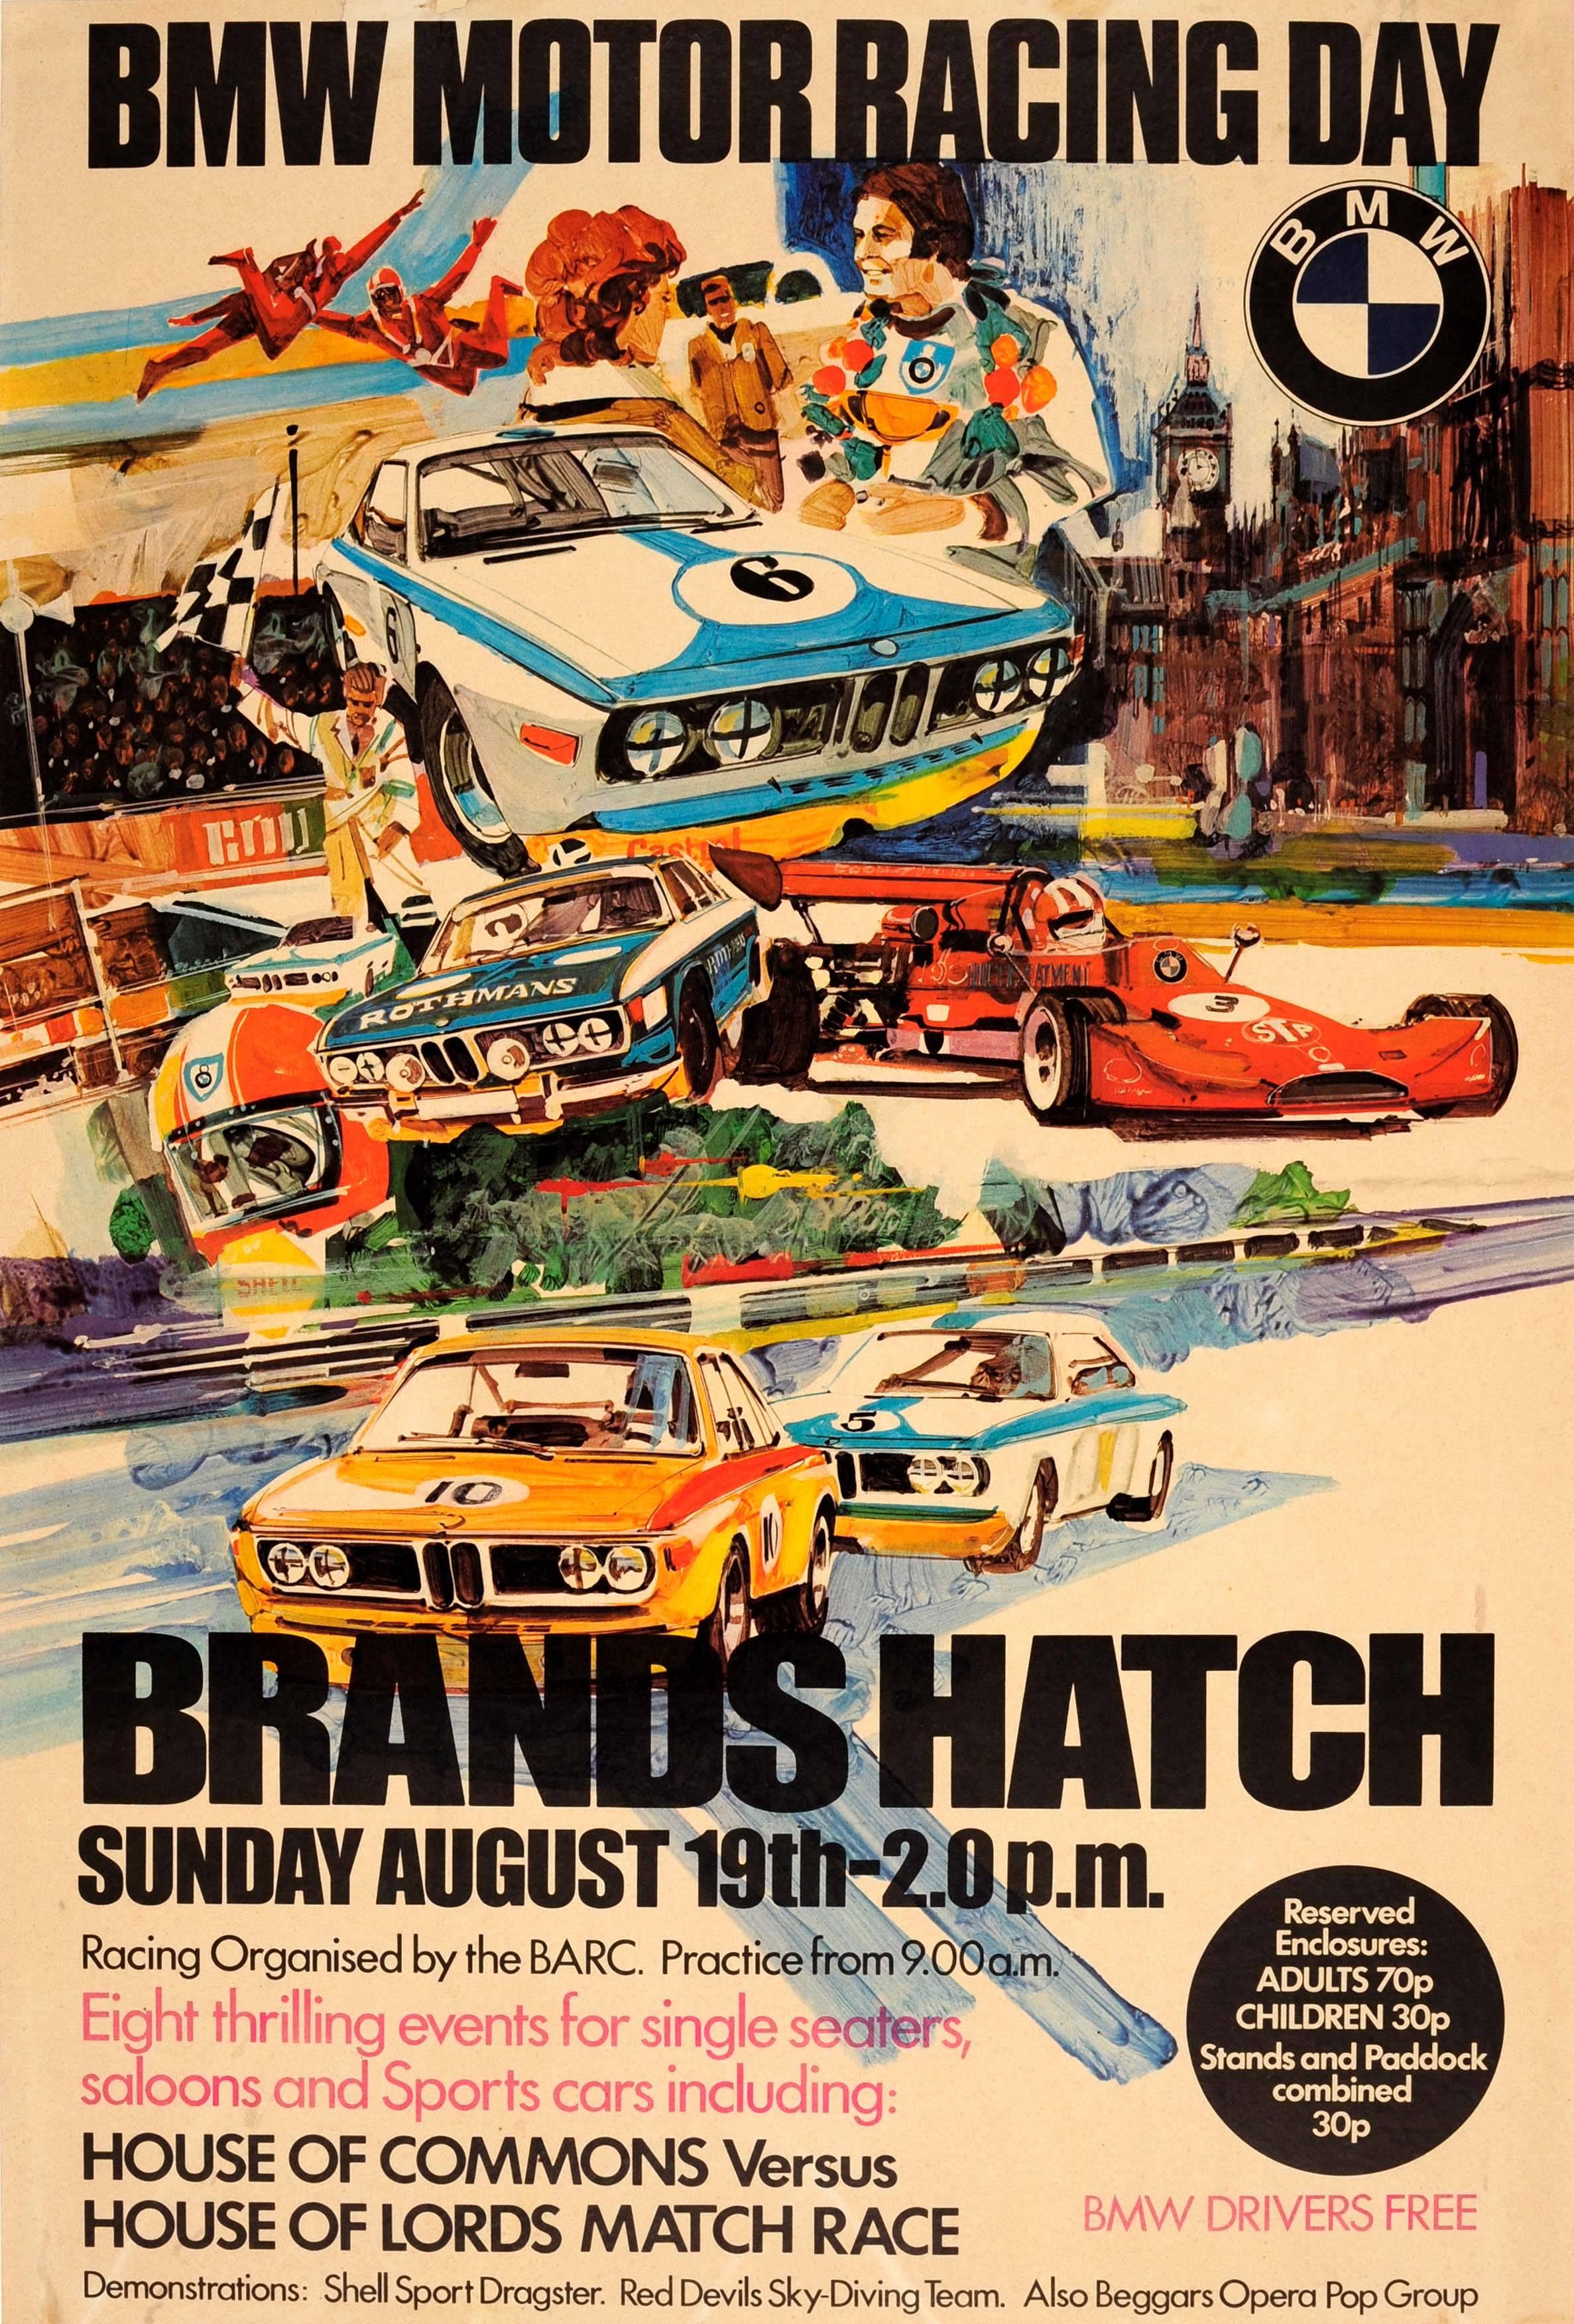 Unknown Print - Original Vintage Sports Car Poster For The BMW Motor Racing Day At Brands Hatch